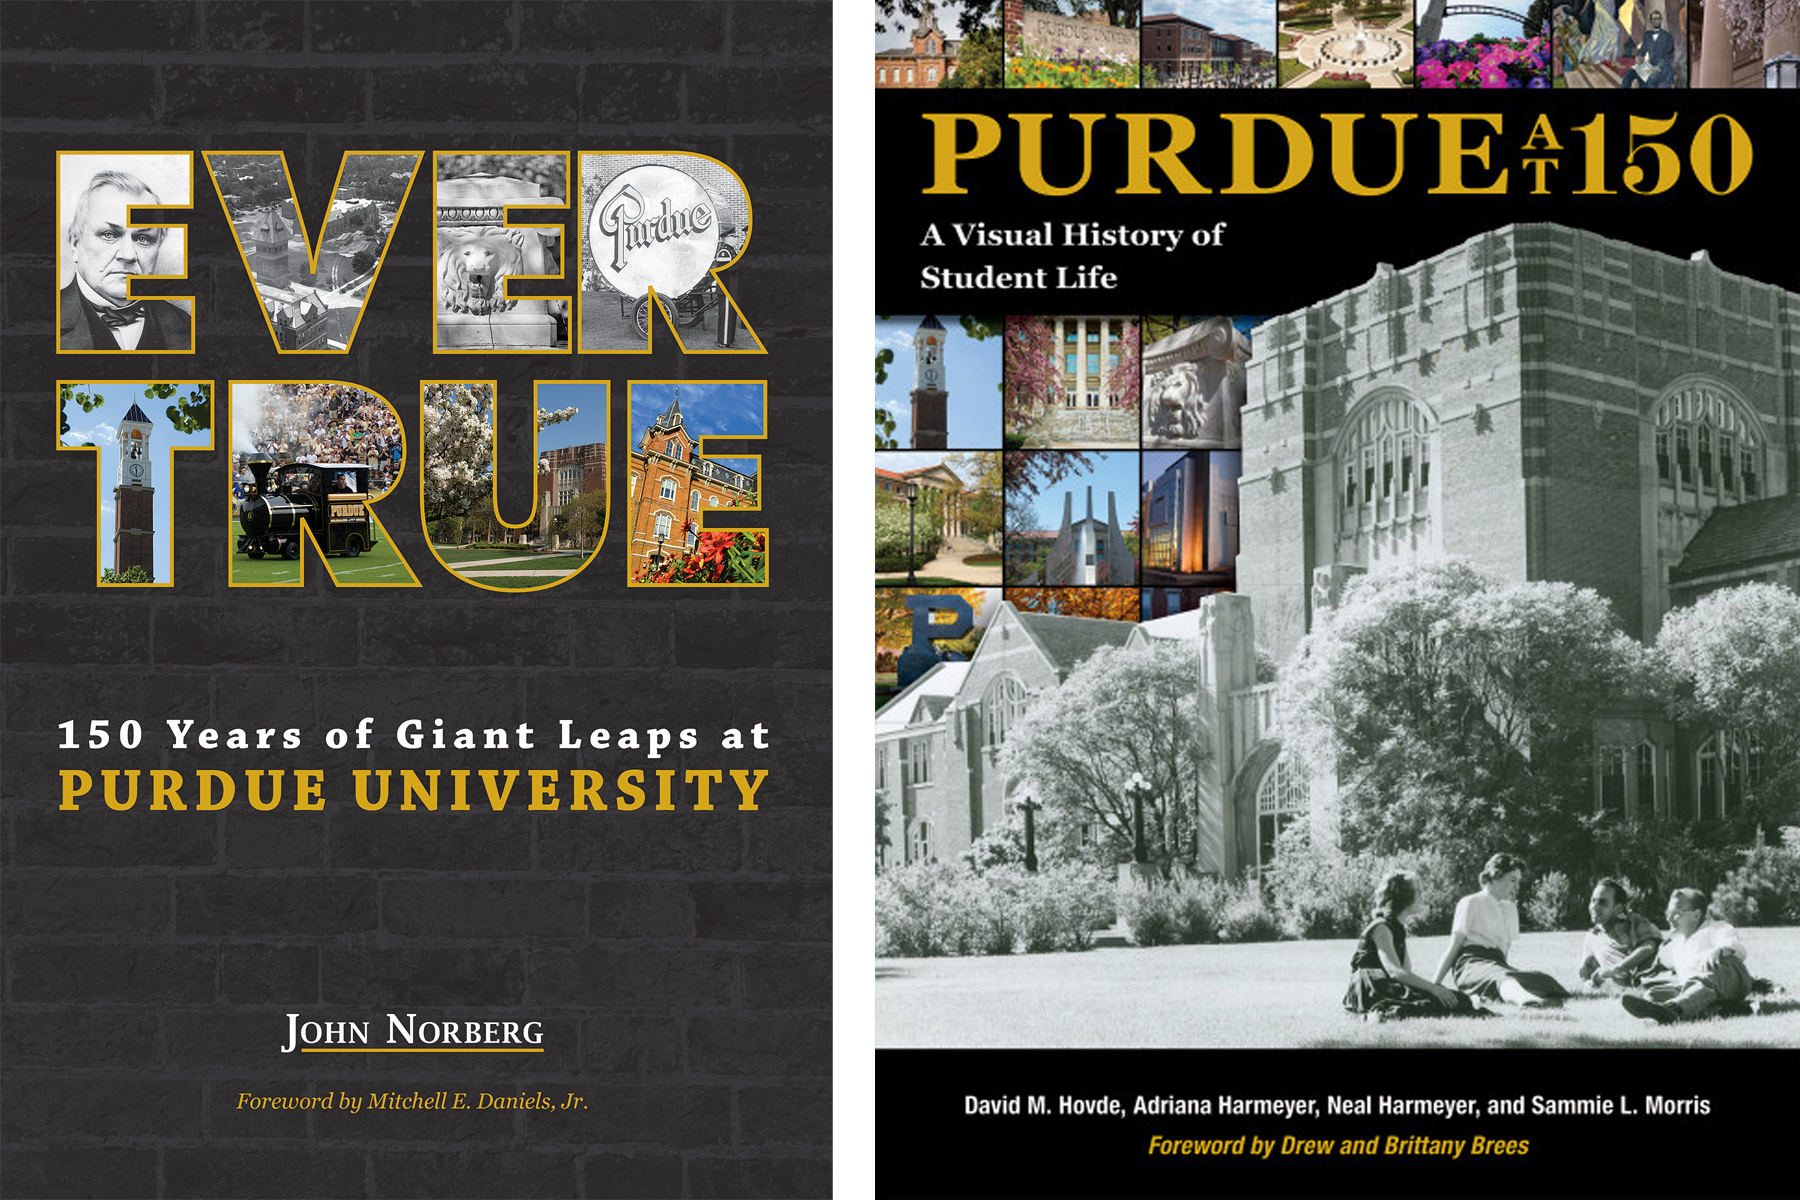 Book covers of "Ever True: 150 years of Giant Leaps at Purdue University” and “Purdue at 150: A Visual History of Student Life”